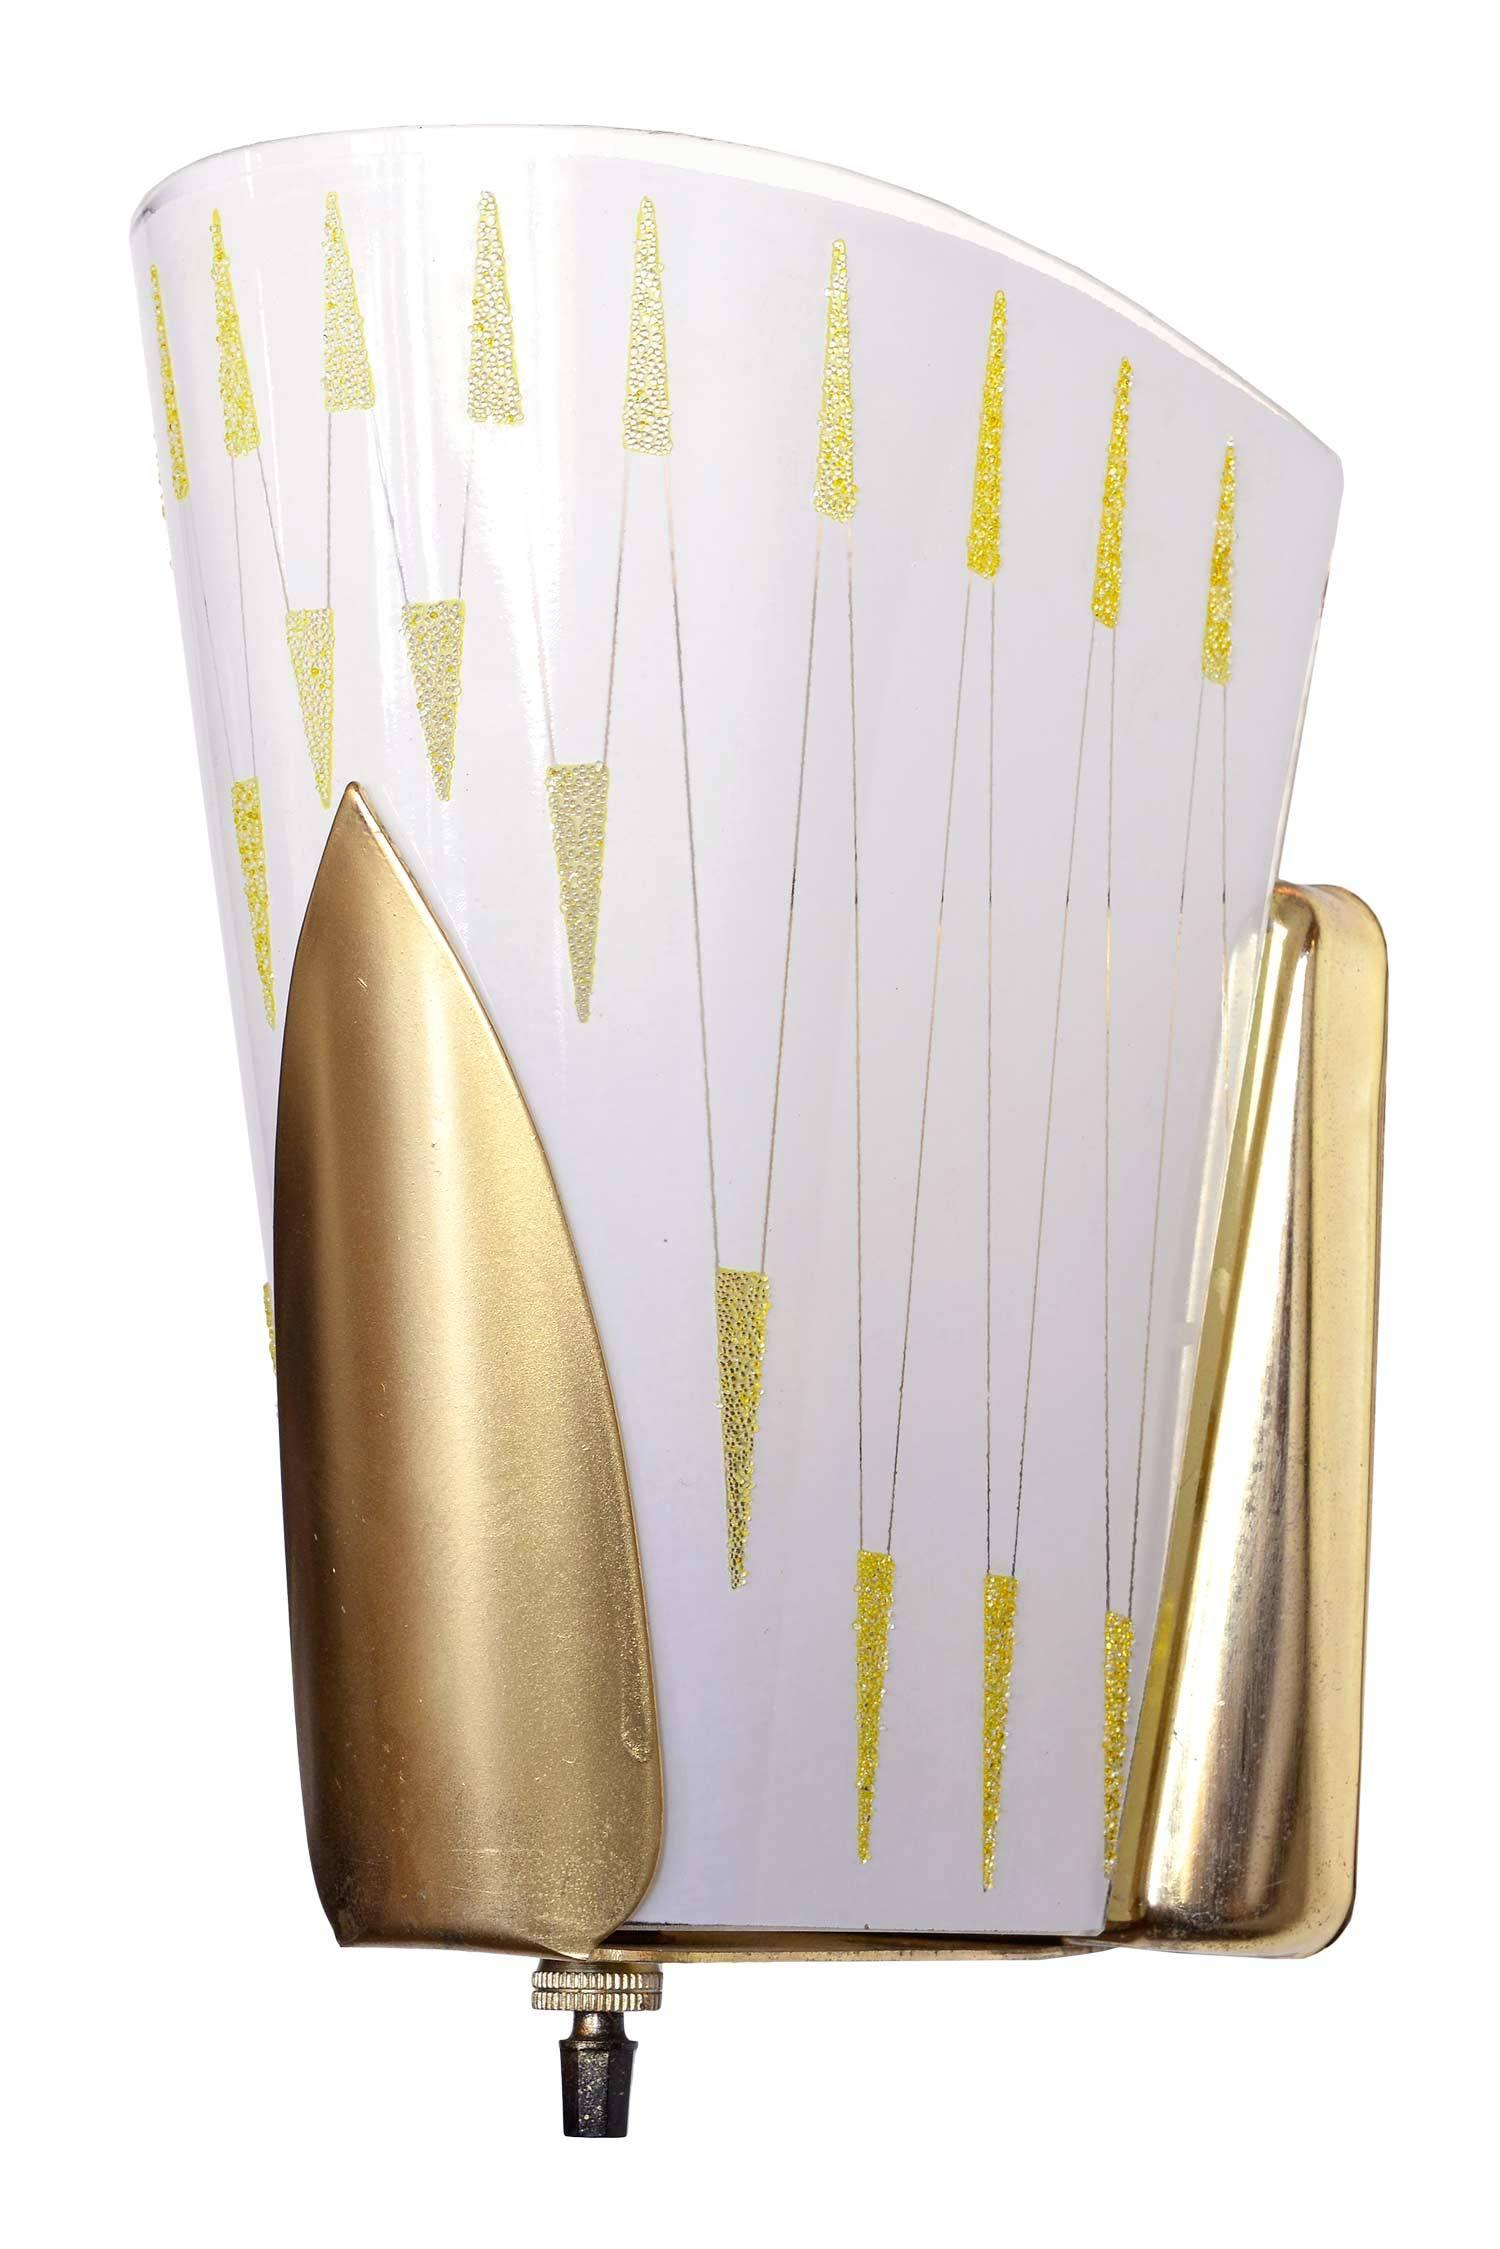 These Midcentury sconces have a streamlined look and a geometric pattern. Raised gold stencil decorates the milk glass shade which is held by a brass sconce body.

We find that early antique lighting was designed as objects of art and we treat each